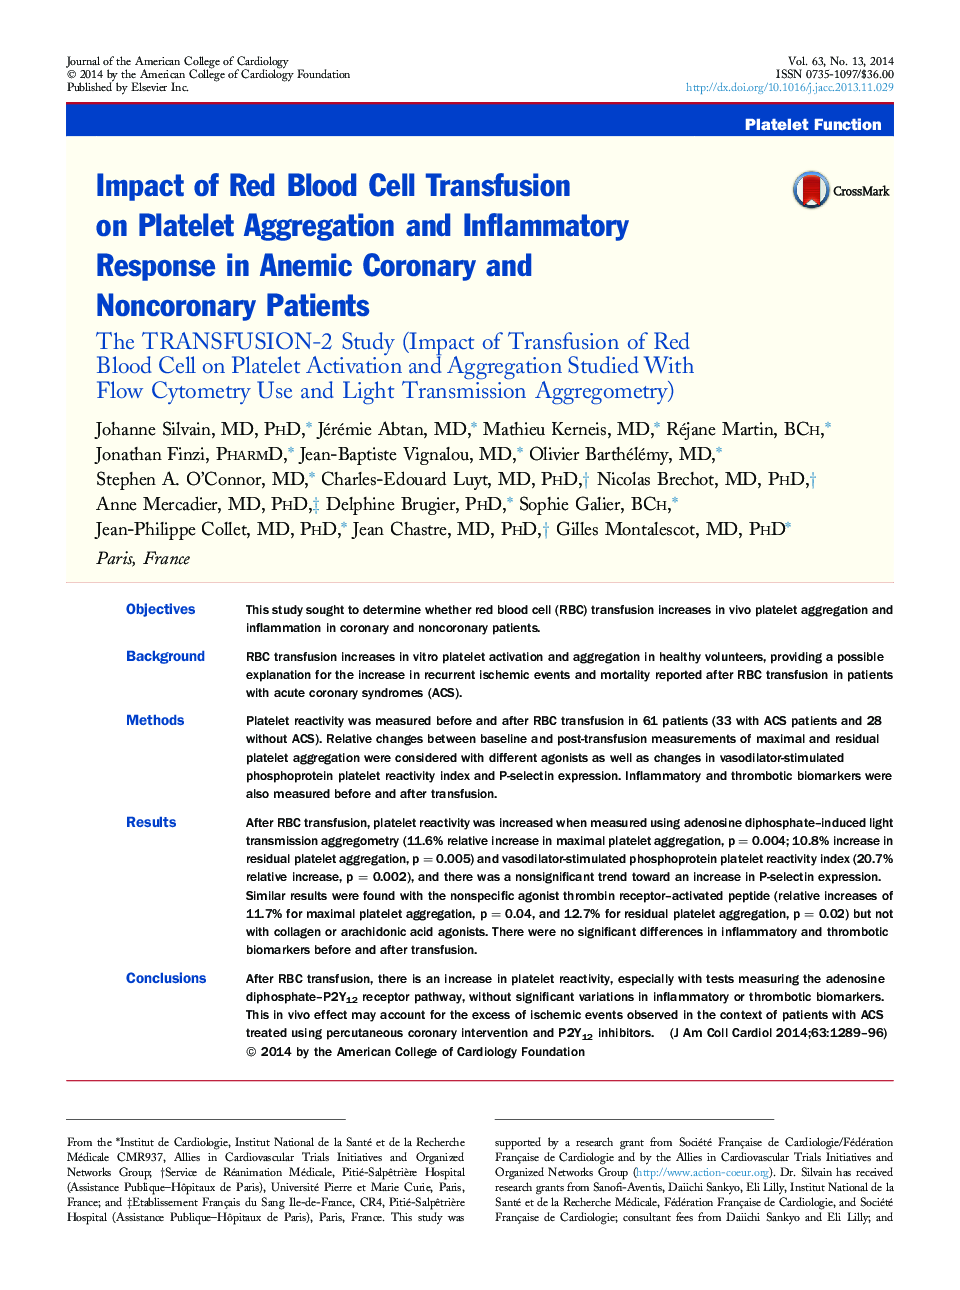 Impact of Red Blood Cell Transfusion on Platelet Aggregation and Inflammatory Response in Anemic Coronary and Noncoronary Patients: The TRANSFUSION-2 Study (Impact of Transfusion of Red Blood Cell on Platelet Activation and Aggregation Studied With Flow C